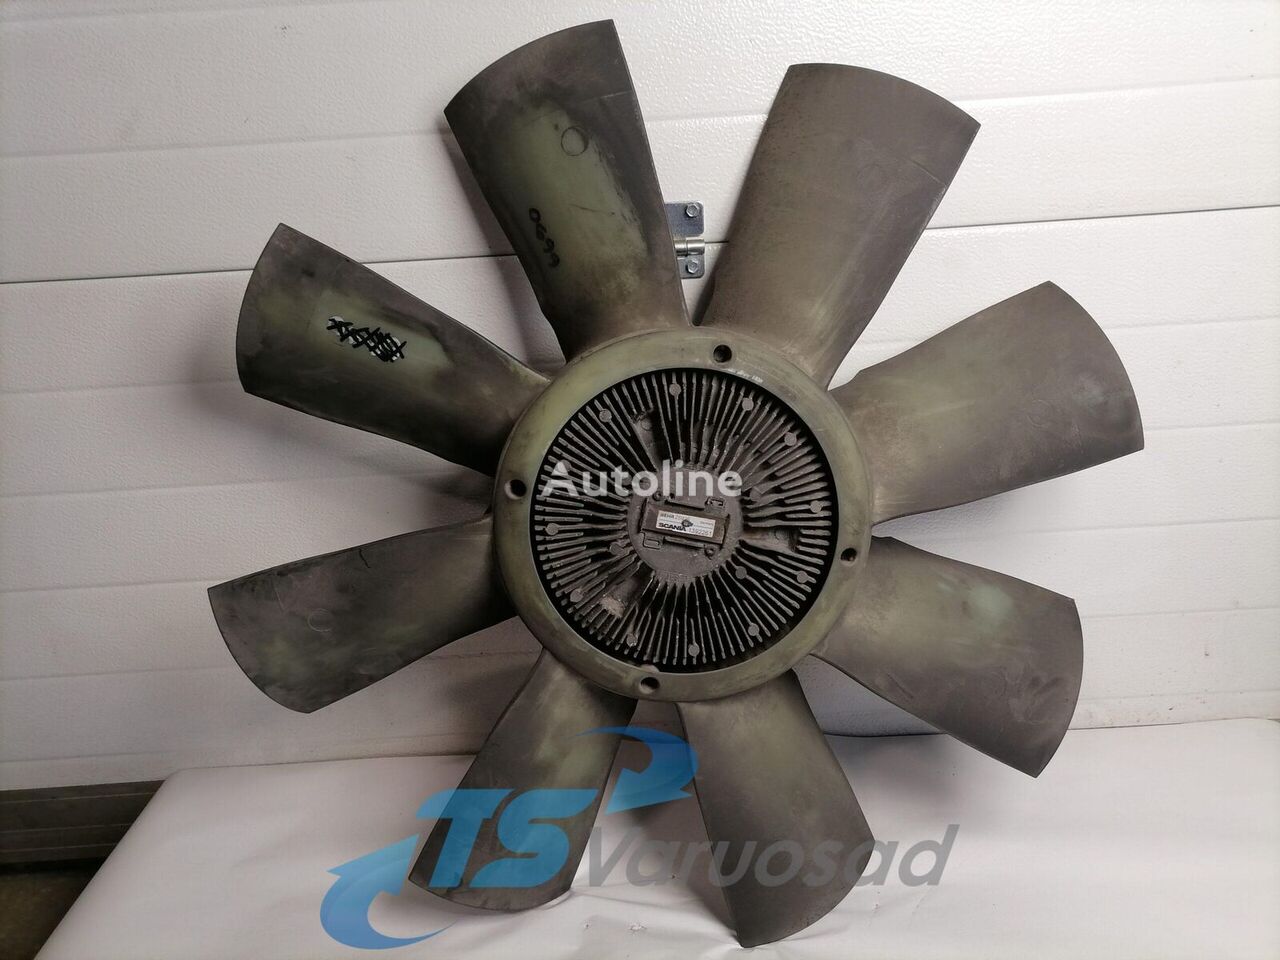 Scania Cooling fan 1394564 for Scania 114 truck tractor